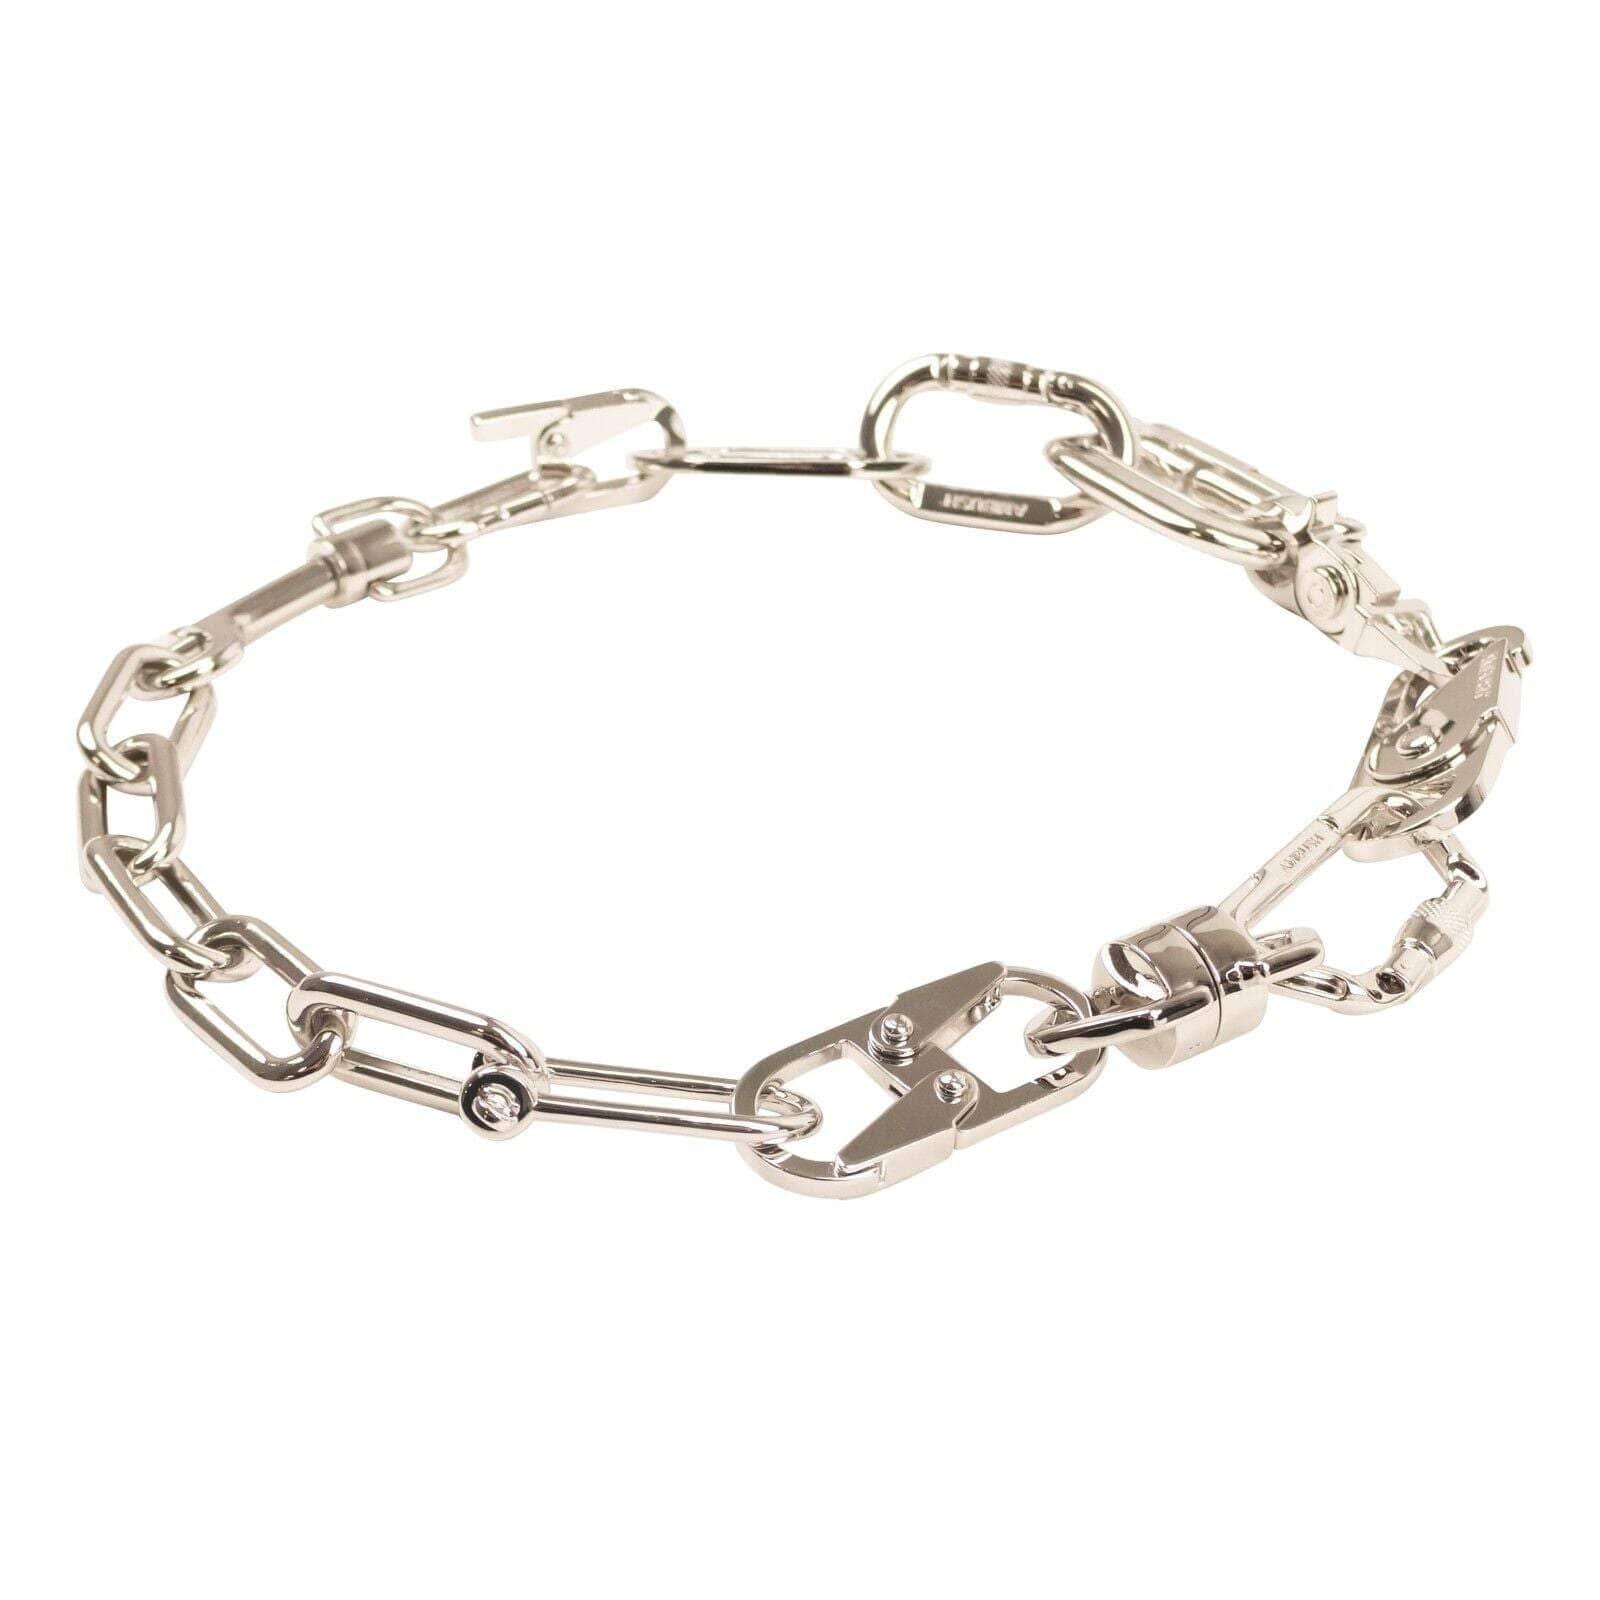 Ambush 1000-2000, ambush, channelenable-all, chicmi, couponcollection, gender-mens, main-accessories, mens-necklaces, mens-shoes, size-os OS Silver Metal Carabiner Necklace 95-AMB-3006/OS 95-AMB-3006/OS